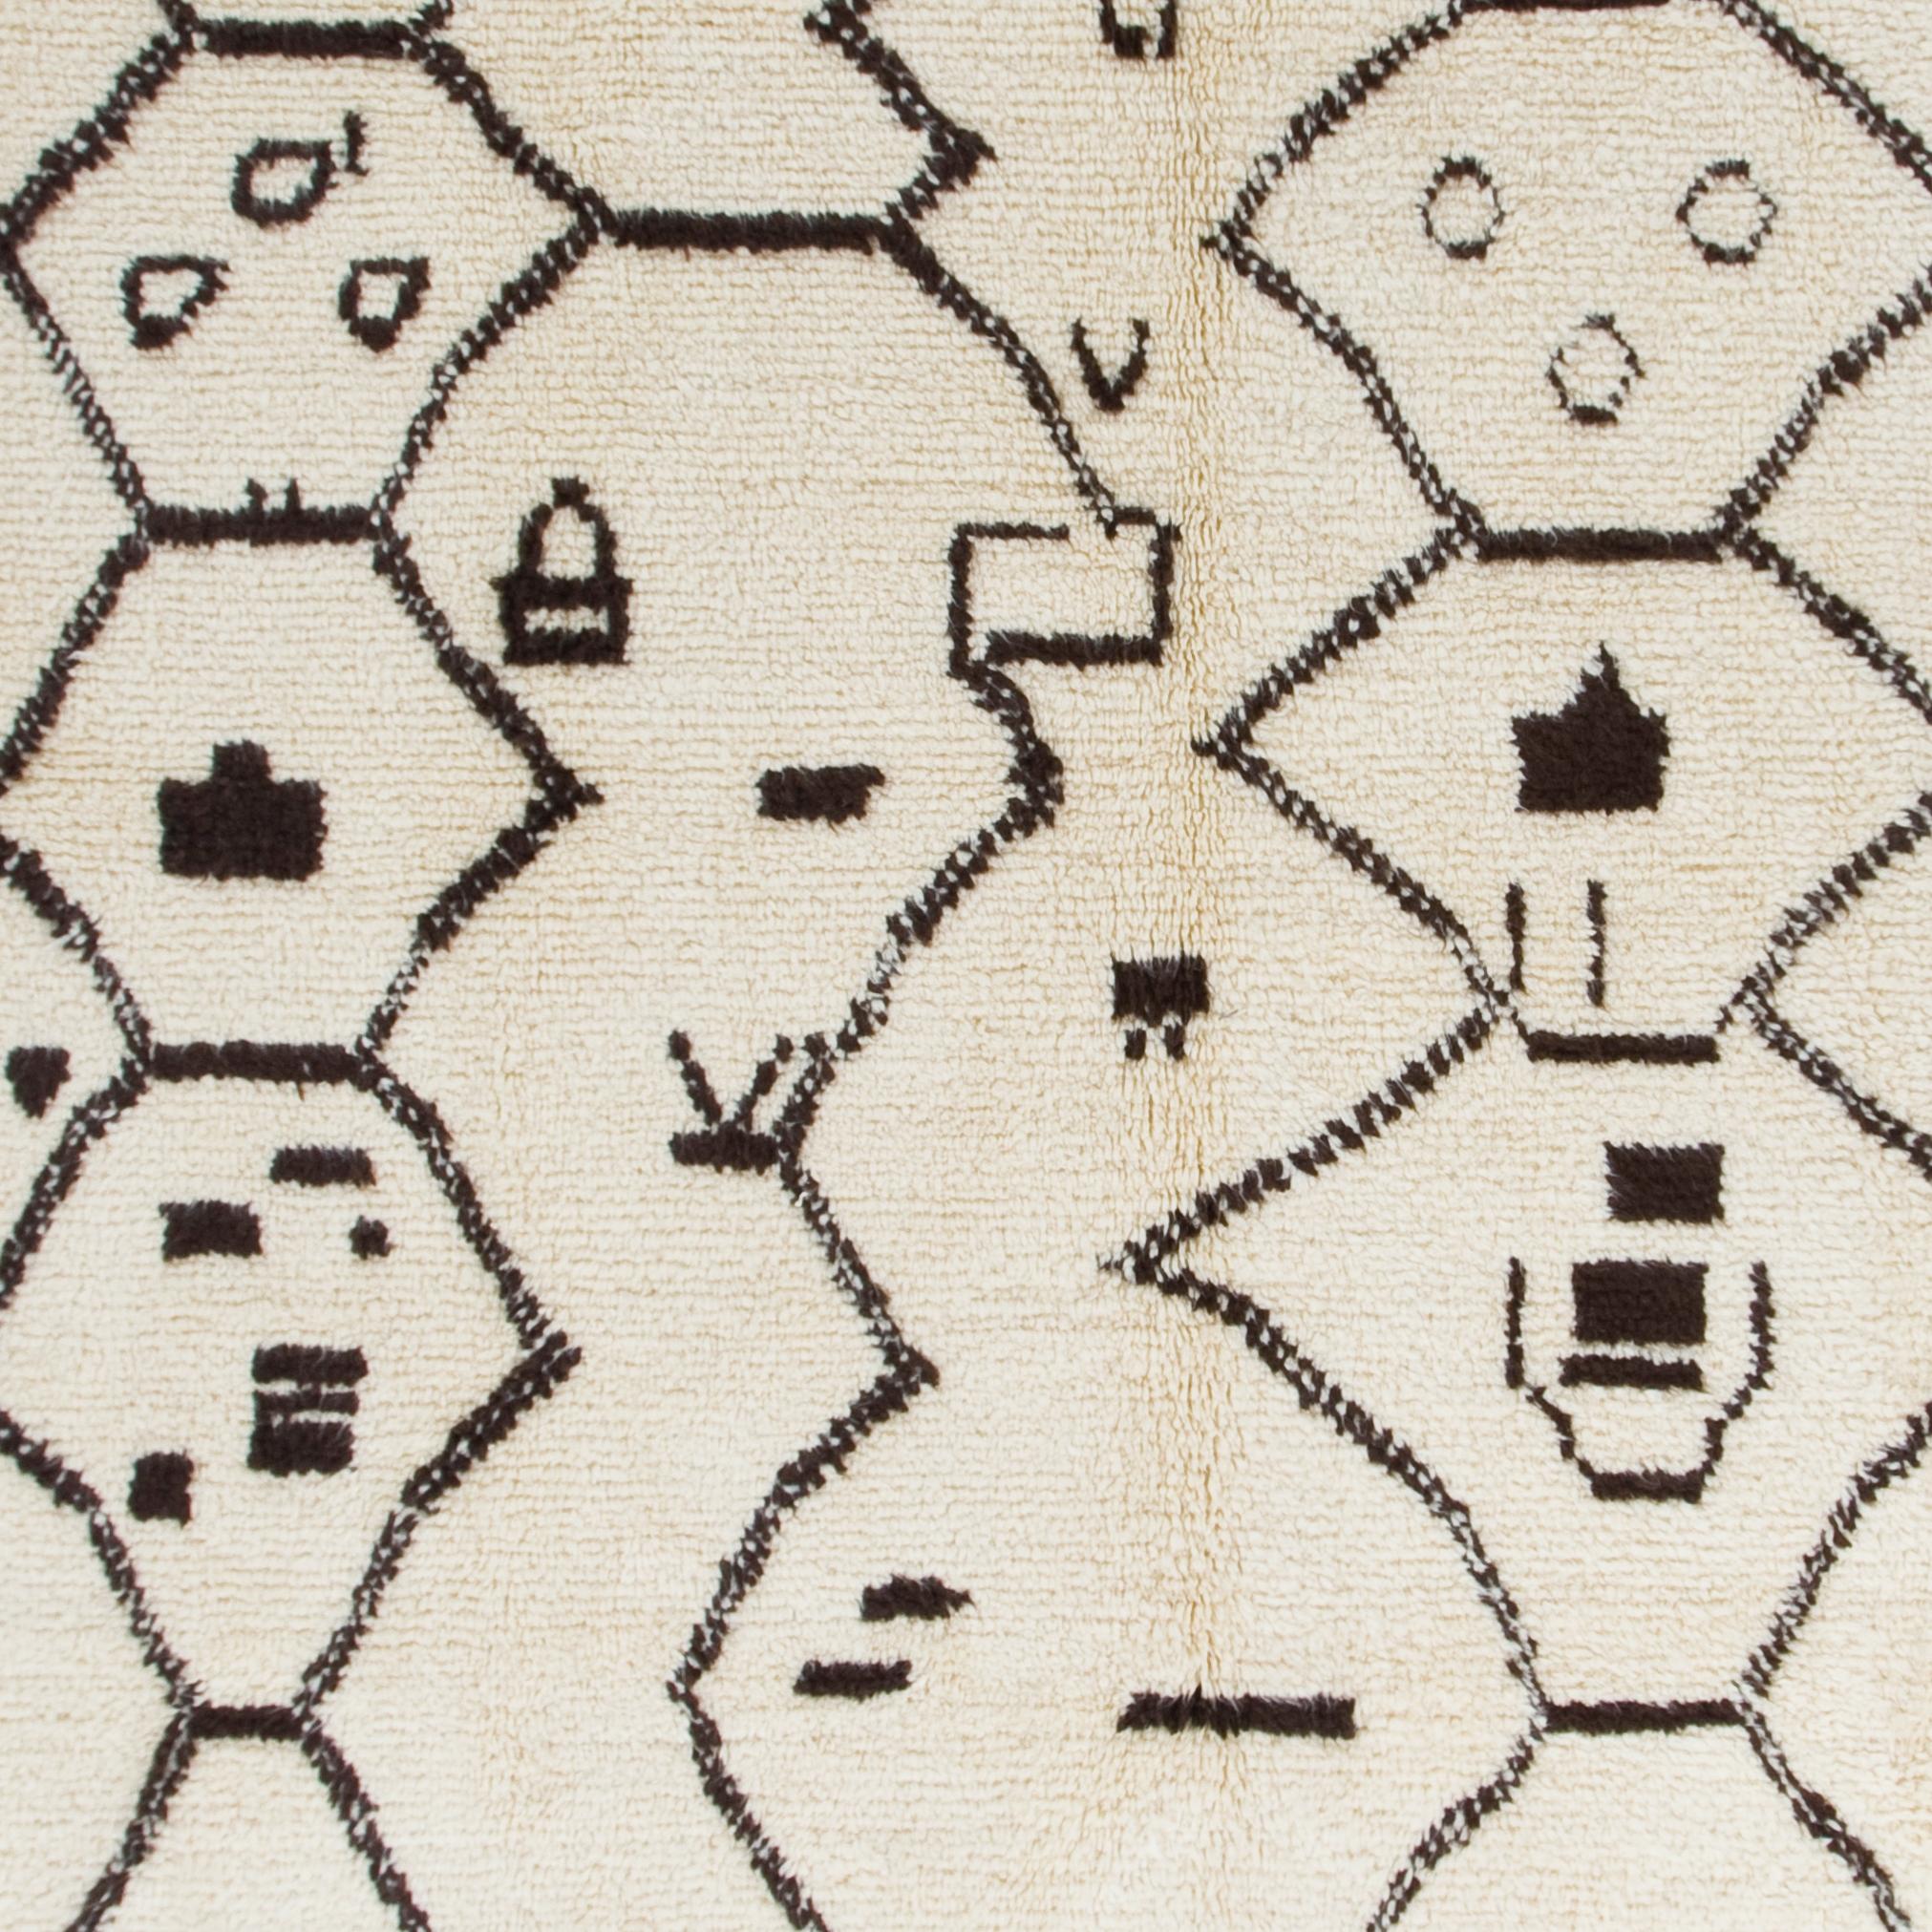 Hand-Knotted Moroccan Rug. 100% Natural Wool. Beni Ourain Berber Carpet in Ivory & Dark Brown For Sale